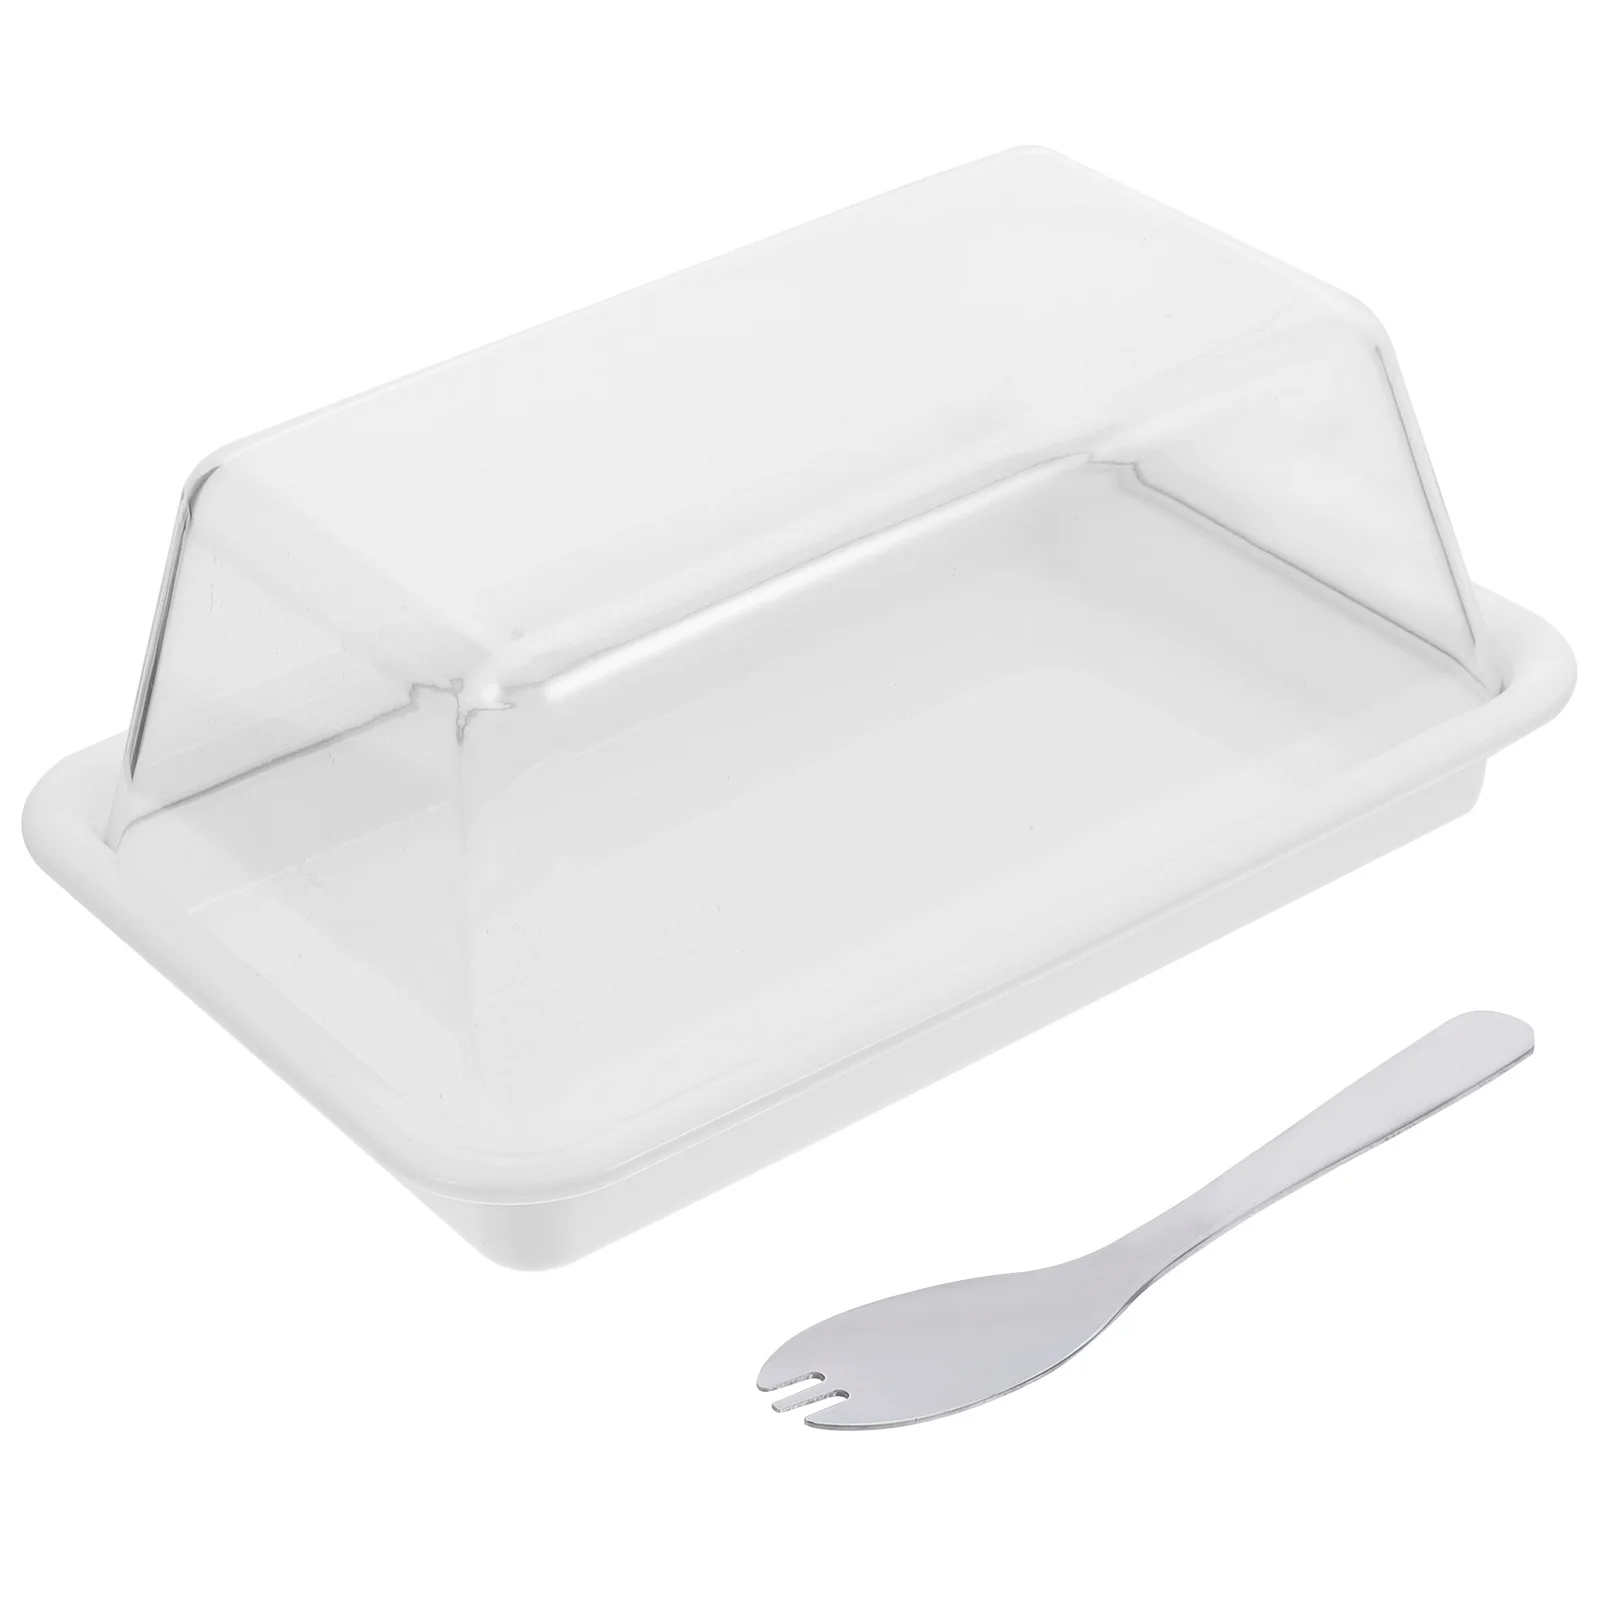 

Butter Dish Plate Cheese Keeper Serving Cake Bowls Container Plastic Tray Box Holder Covered Storage Lid Salad Platter Snack